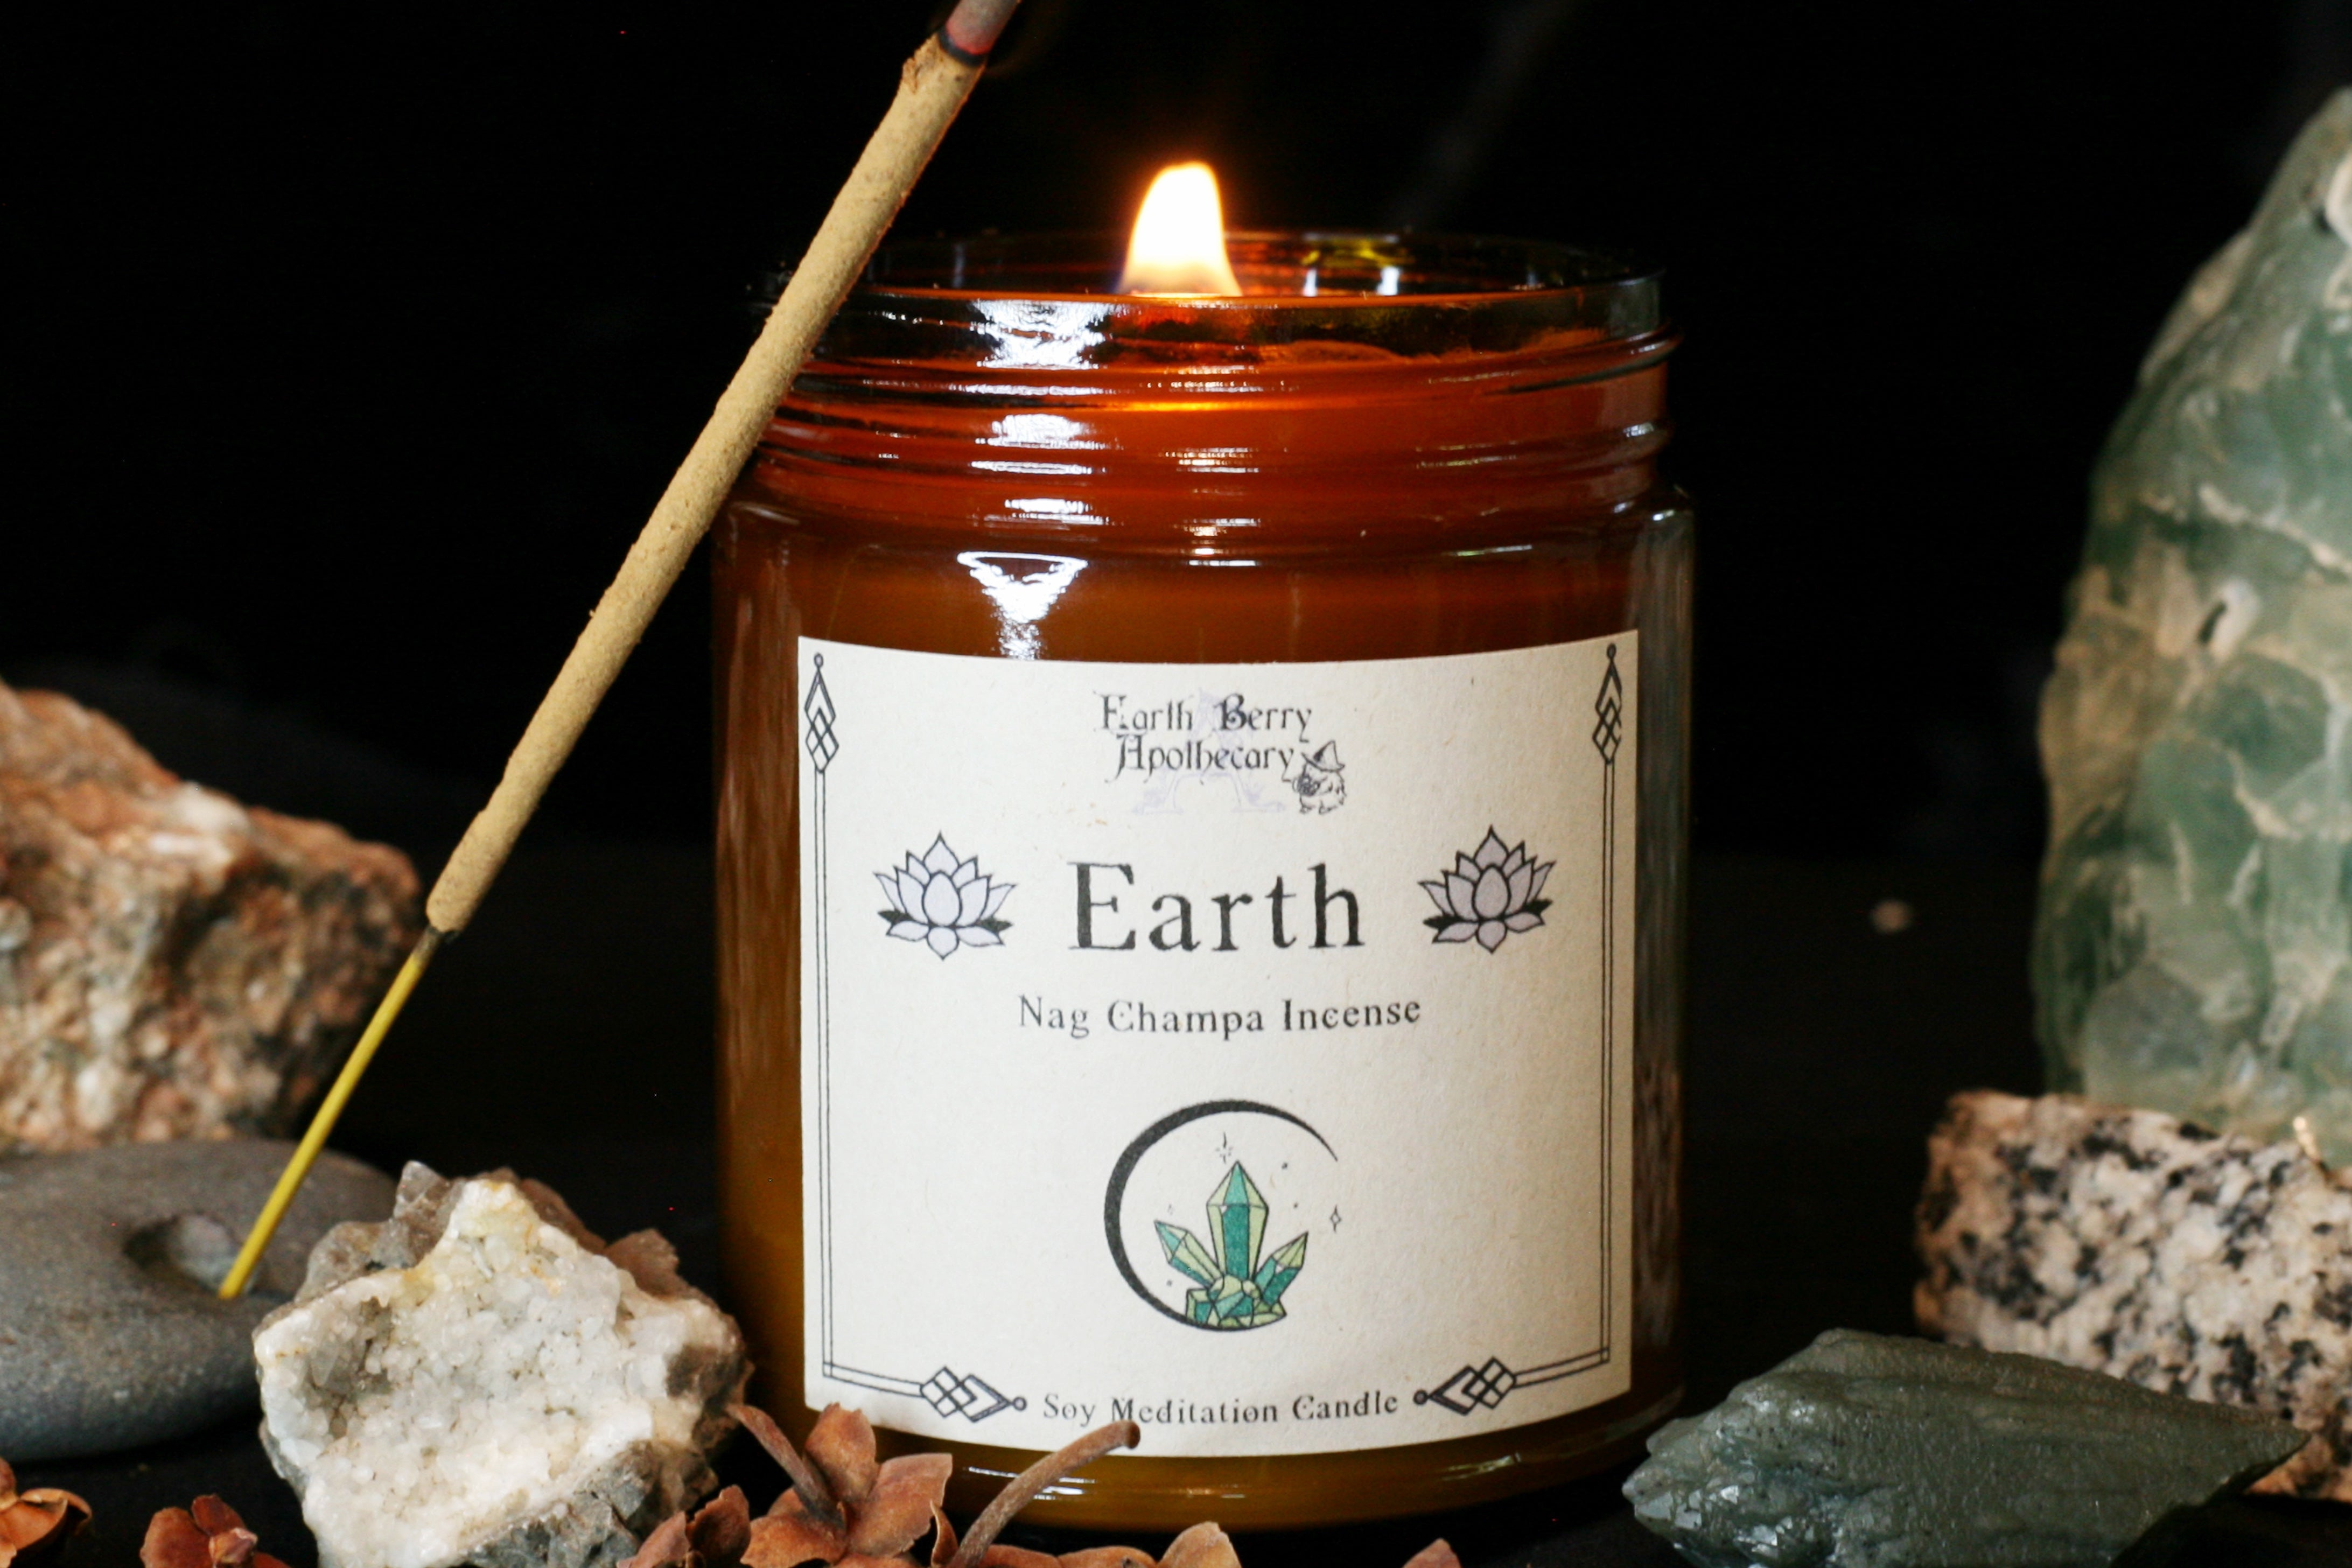 Earth Crackling Wood Wick Meditation Candle by Earth Berry Apothecary